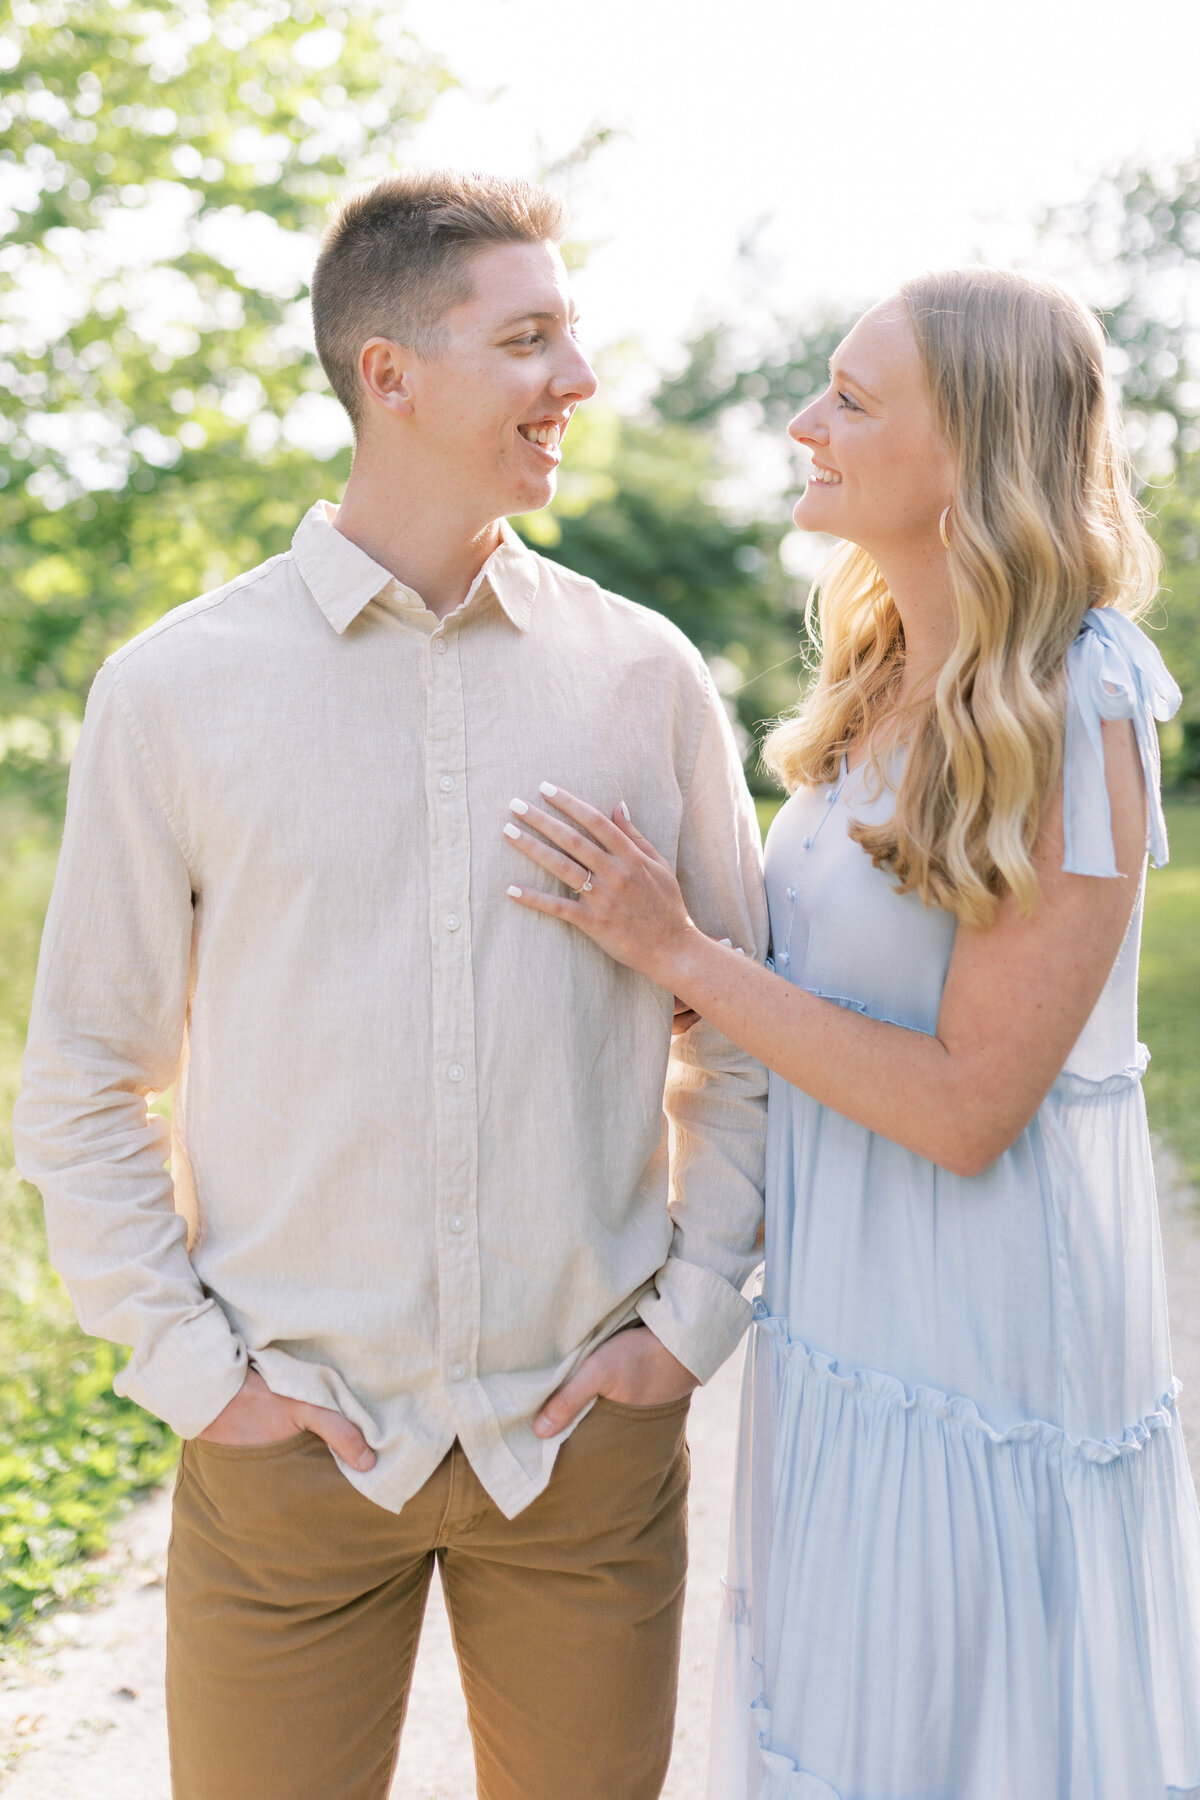 amber-rhea-photography-midwest-wedding-photographer-stl-engagement210A4723